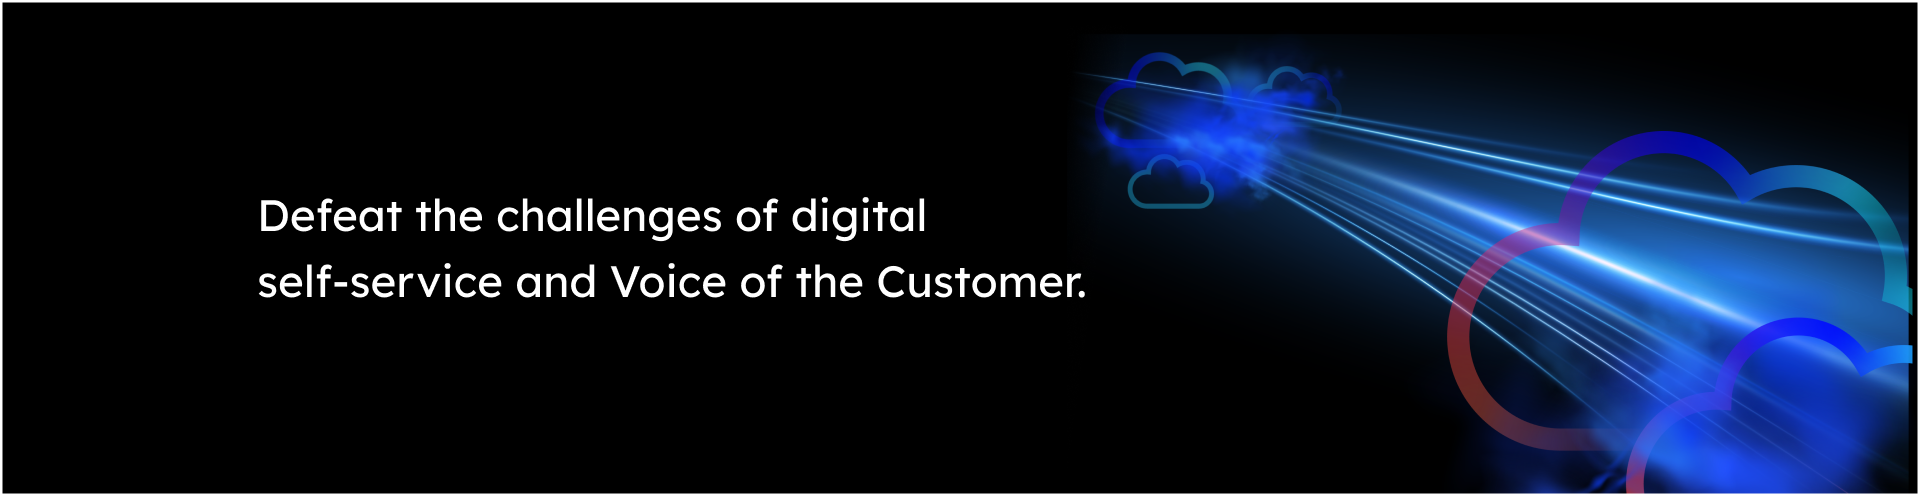 Defeat the challenges of digital self-service and VoC